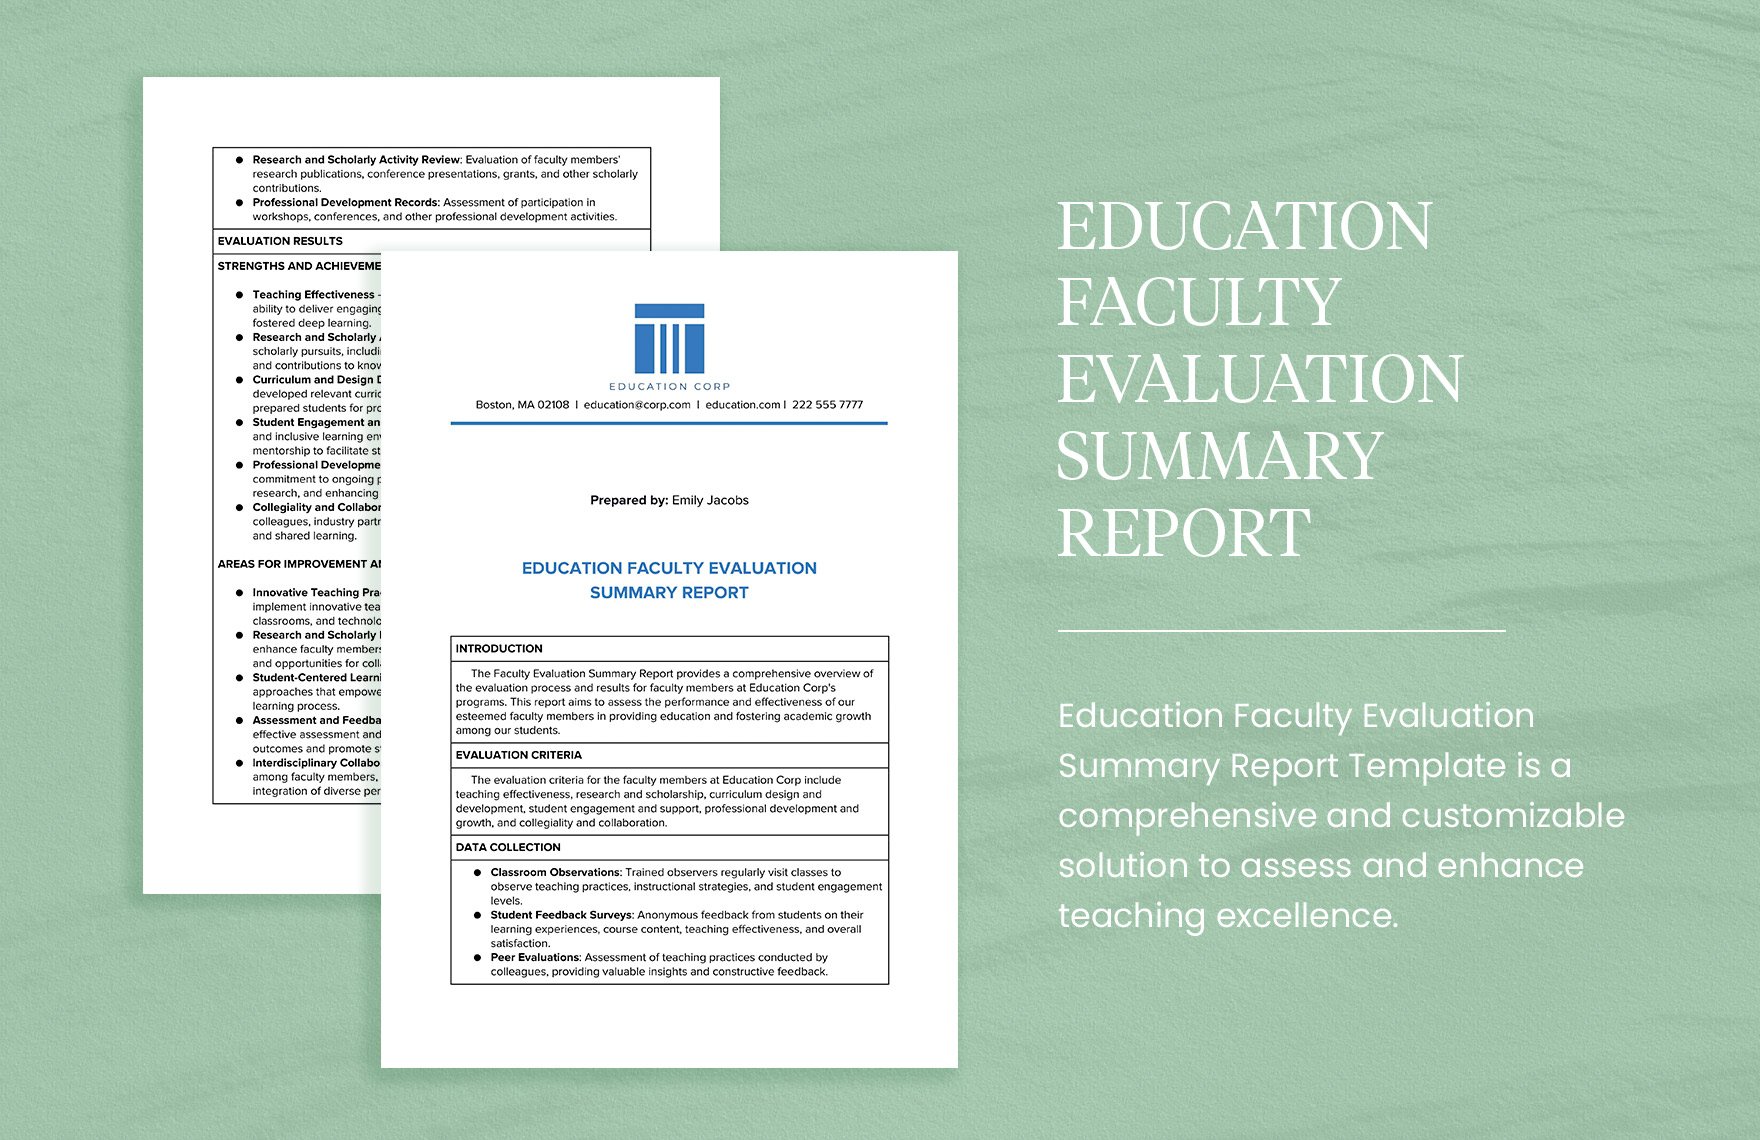 Education Faculty Evaluation Summary Report